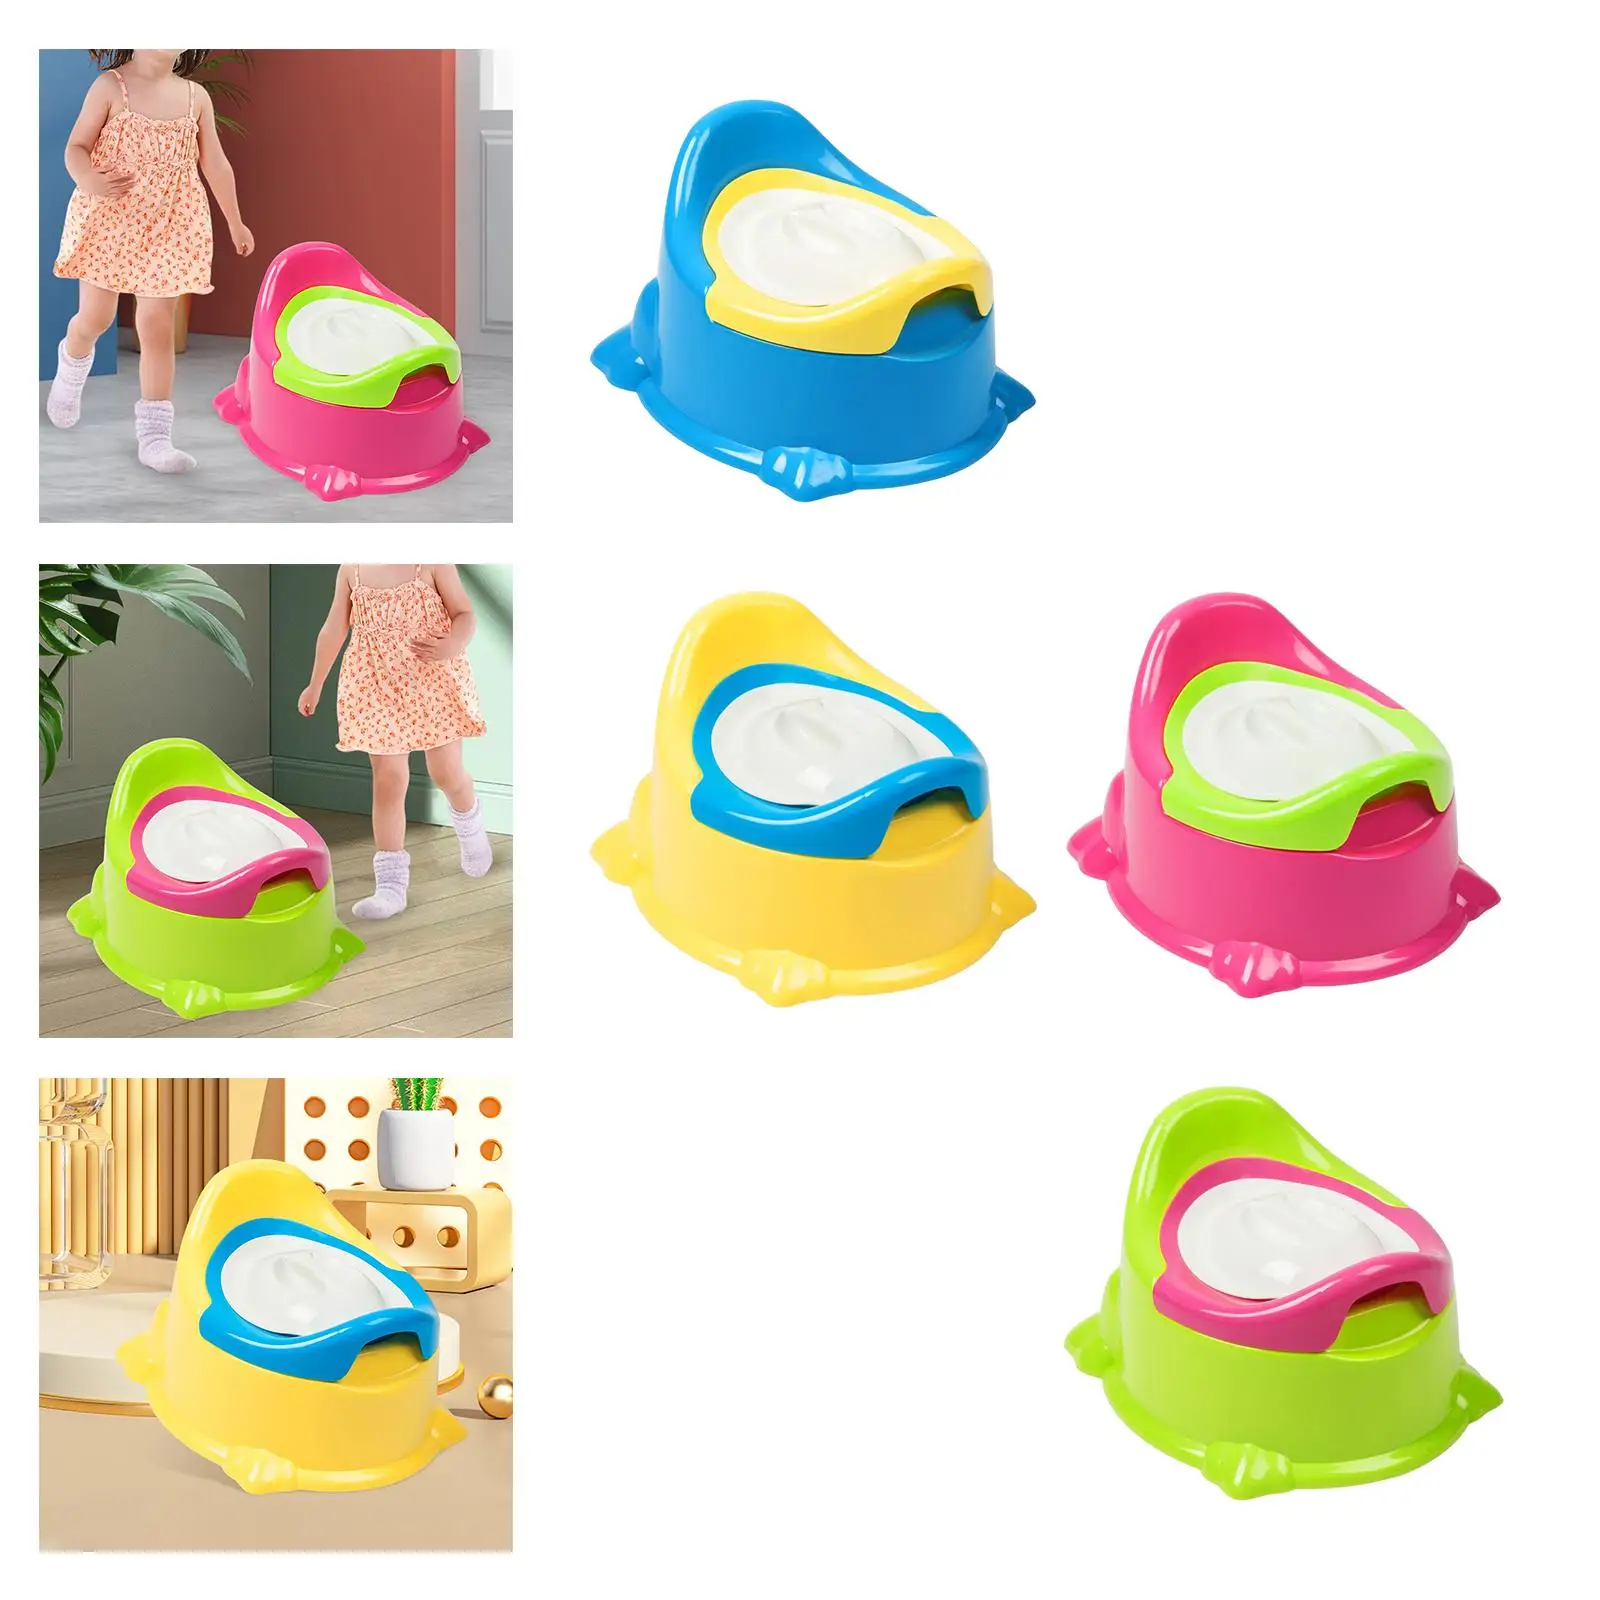 Portable Baby Potty Toilet Training Seat Comfortable Stable Anti Skid Trainer Baby Potty Chair for Babies 6-12 Month Home